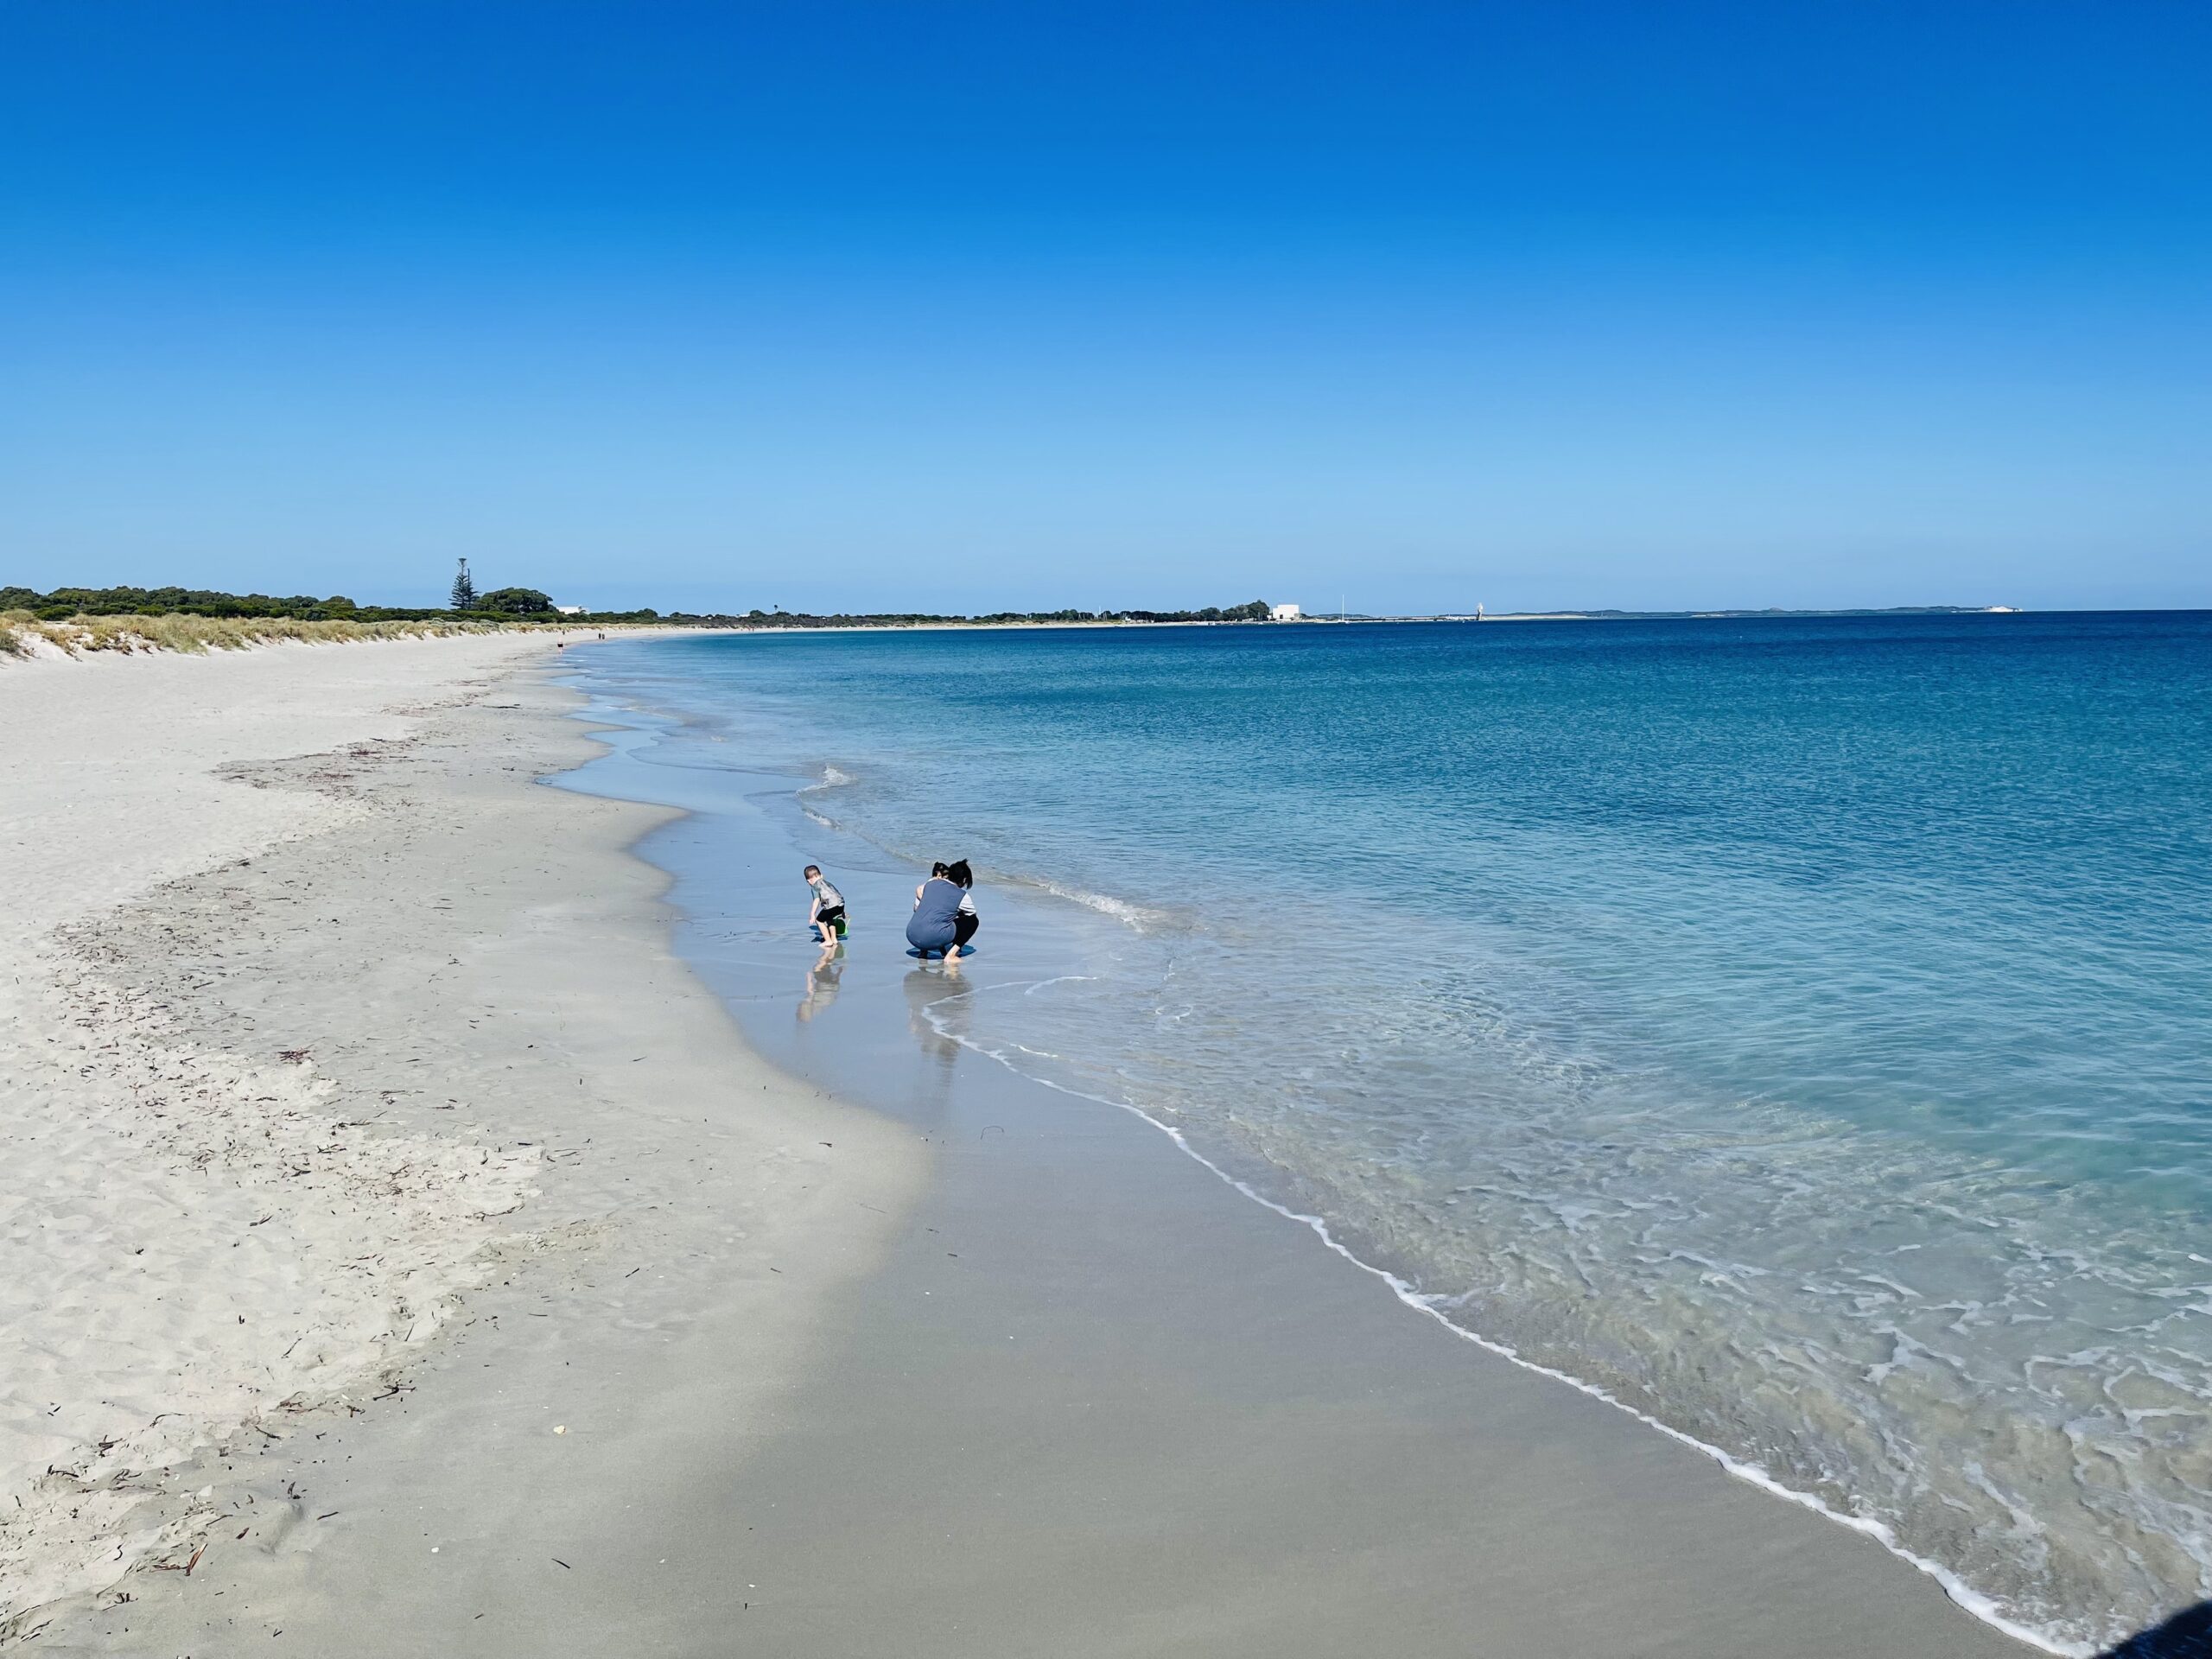 This photograph shows the white sand coastline of Woodman Point beach, where a mum with her two small kids play in the shallow water. The water is clear, and blue in colour ranging from light to dark. The coast line is surrounded by sand dunes with green shrubbery. The sky above is clear and blue.